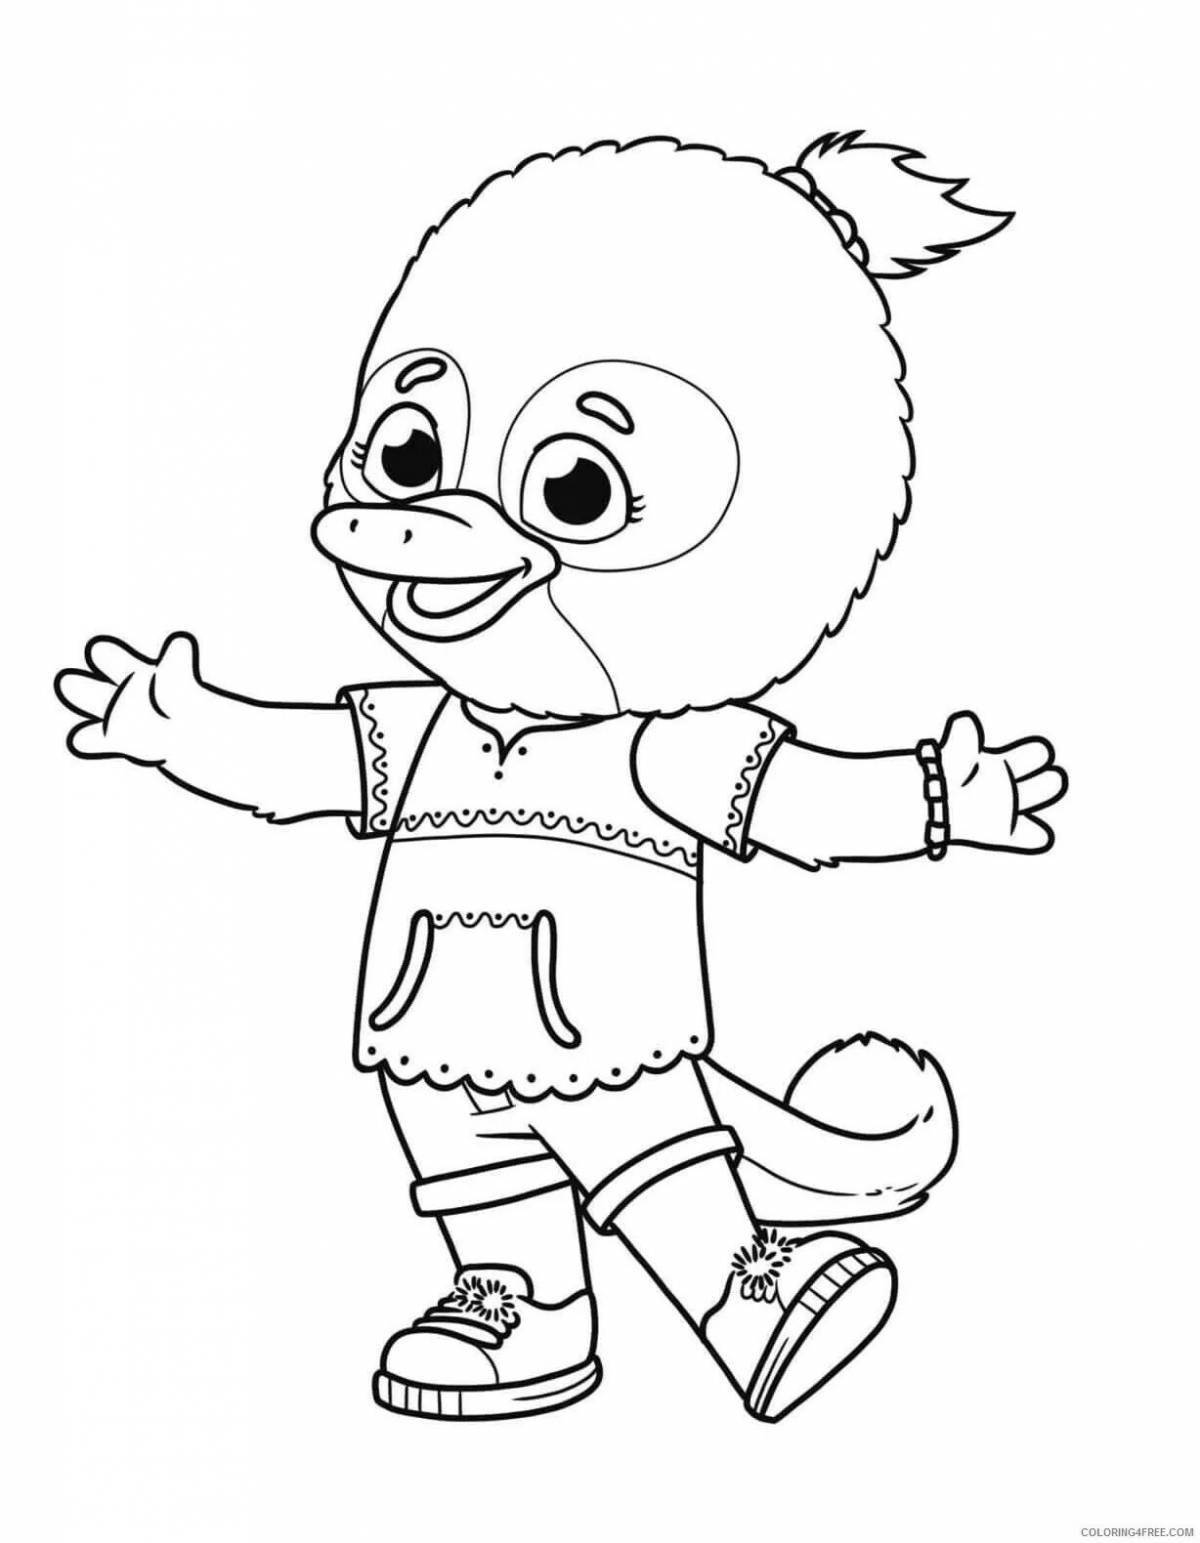 Color-party wednesday coloring page for kids